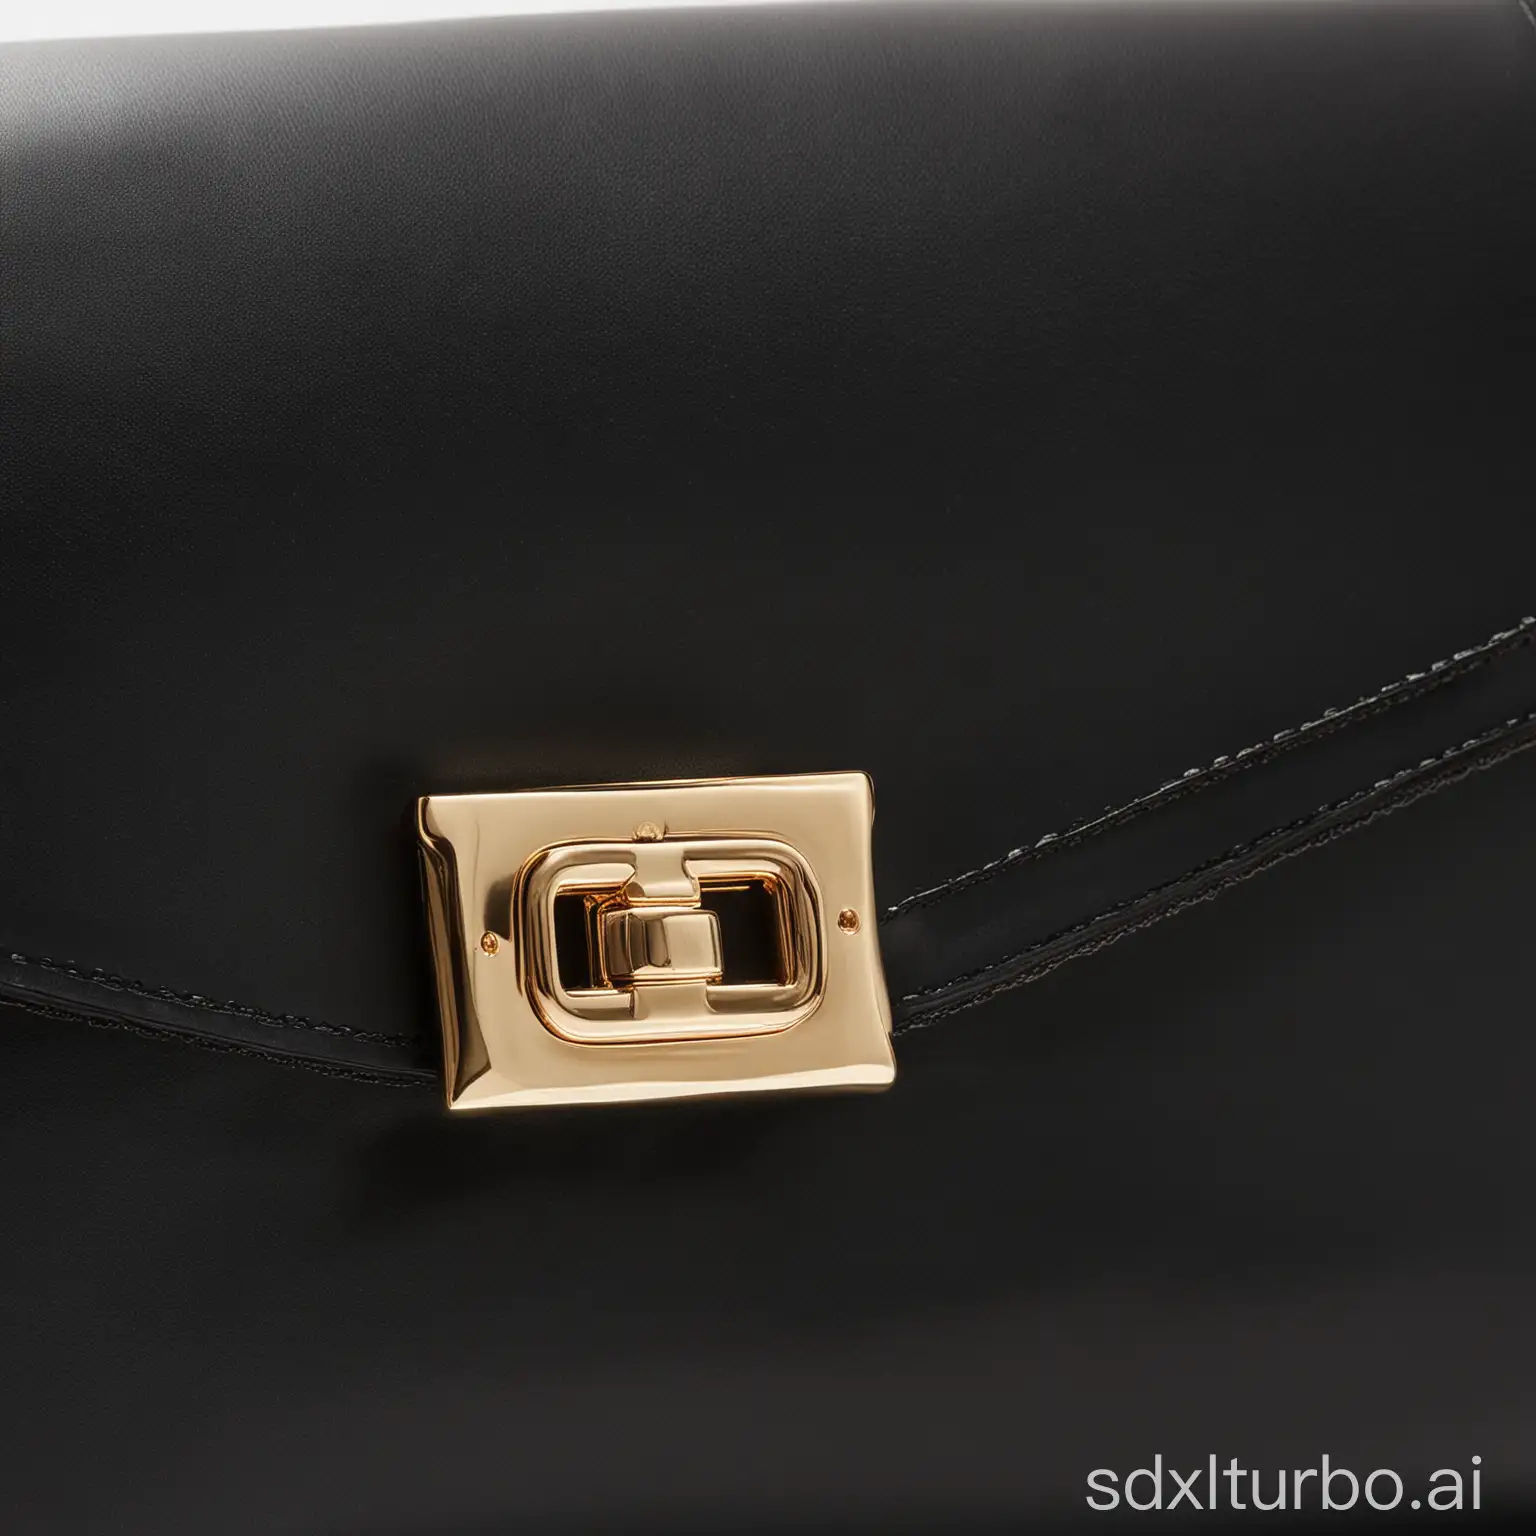 A close-up of a black leather handbag. The bag is made of a soft, supple leather and has a classic silhouette with a flap closure and gold hardware. The bag is sitting on a white background, and the light is shining on it, highlighting its luxurious texture and shine.